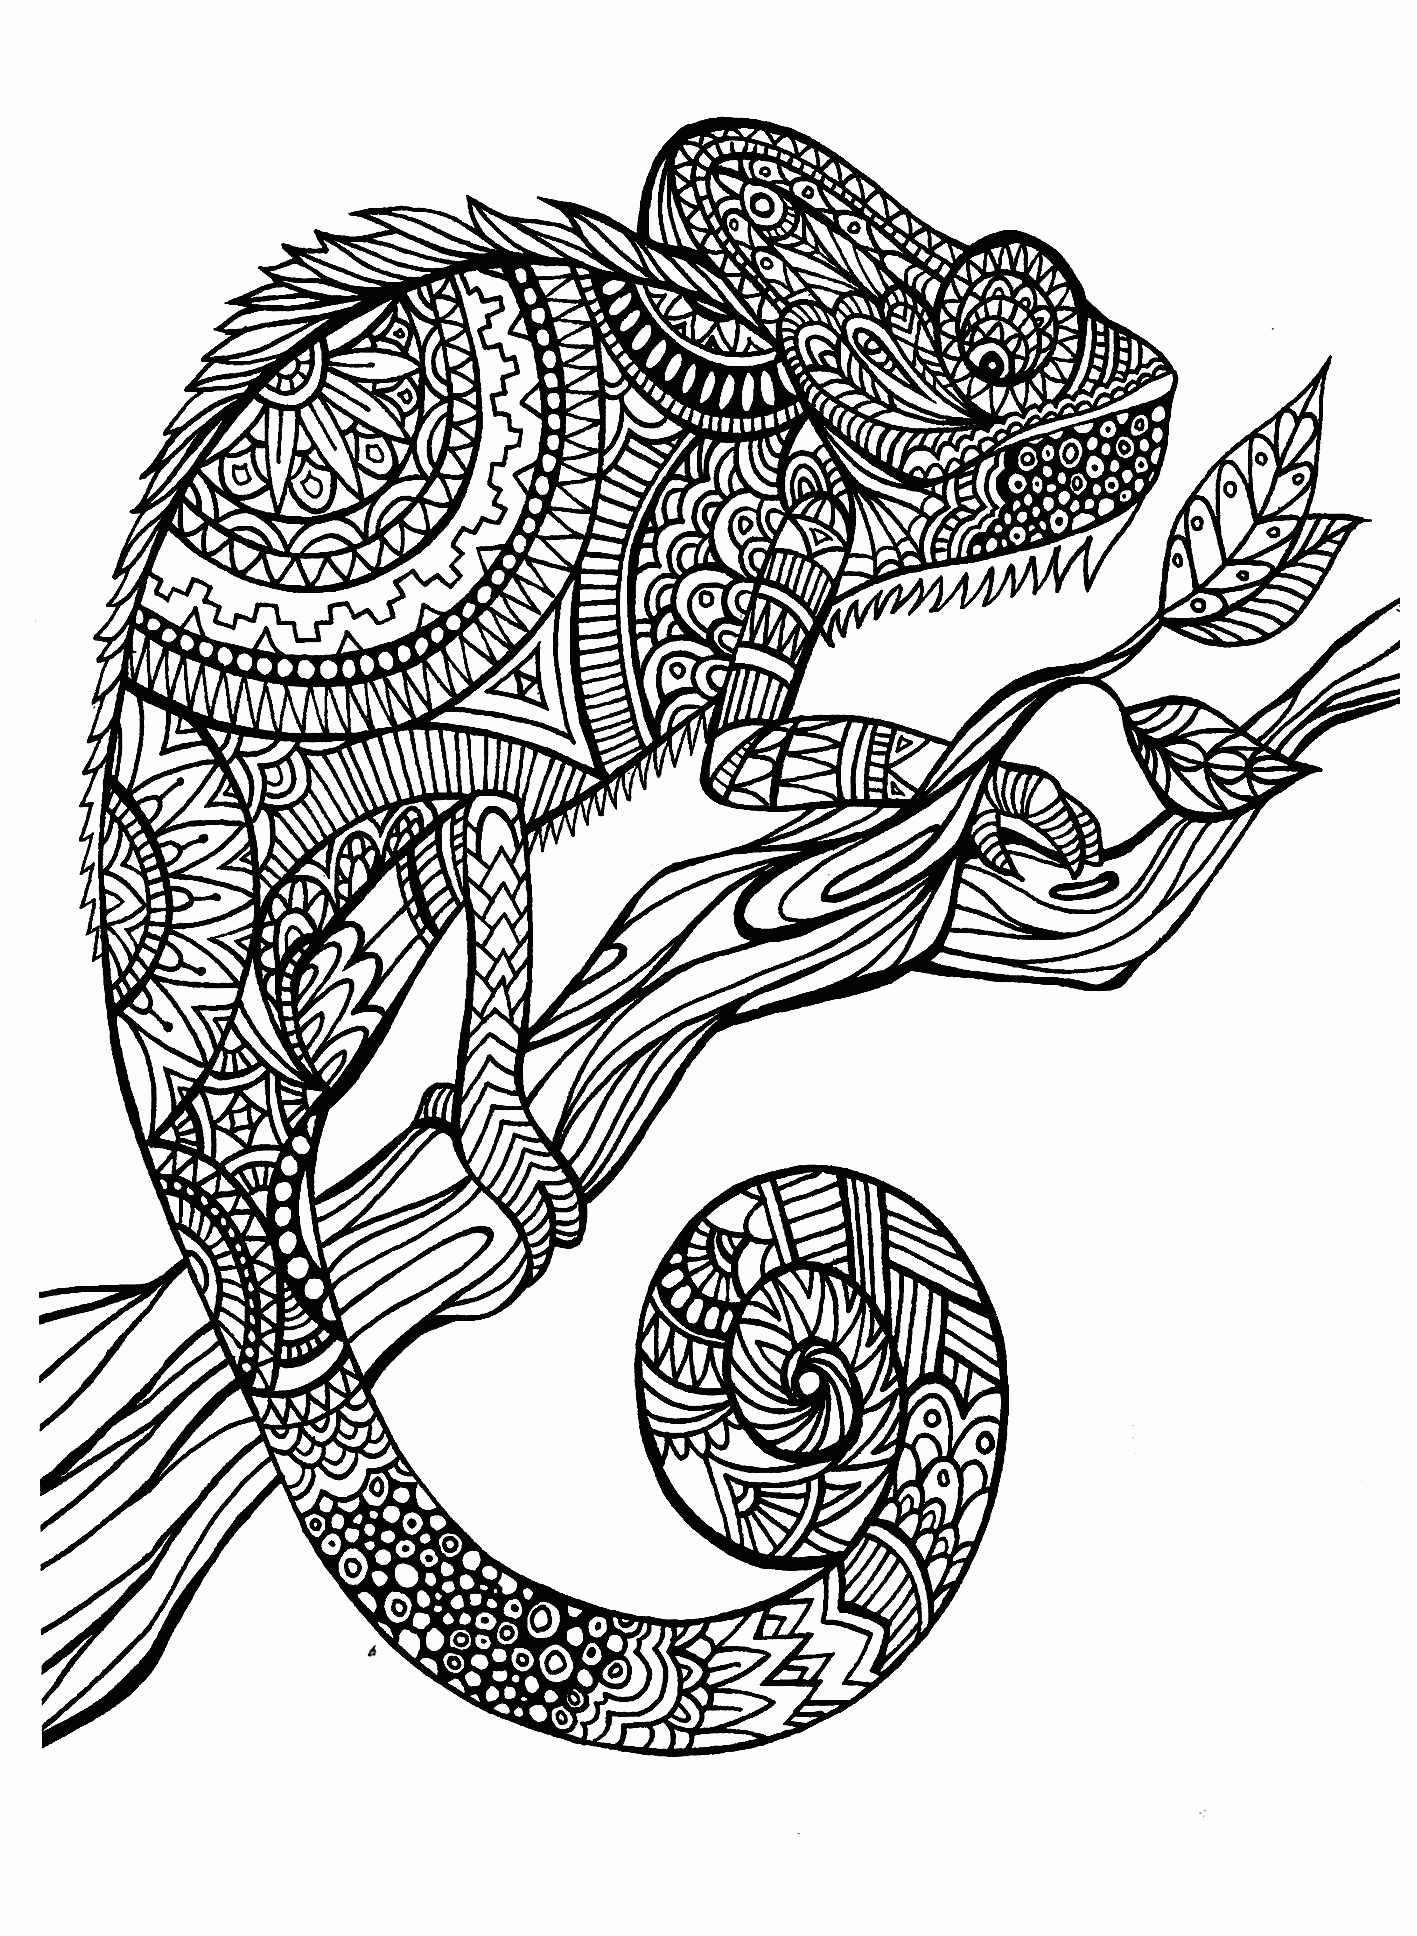 Animal   Coloring Pages For Adults   Page 20   Coloring Home